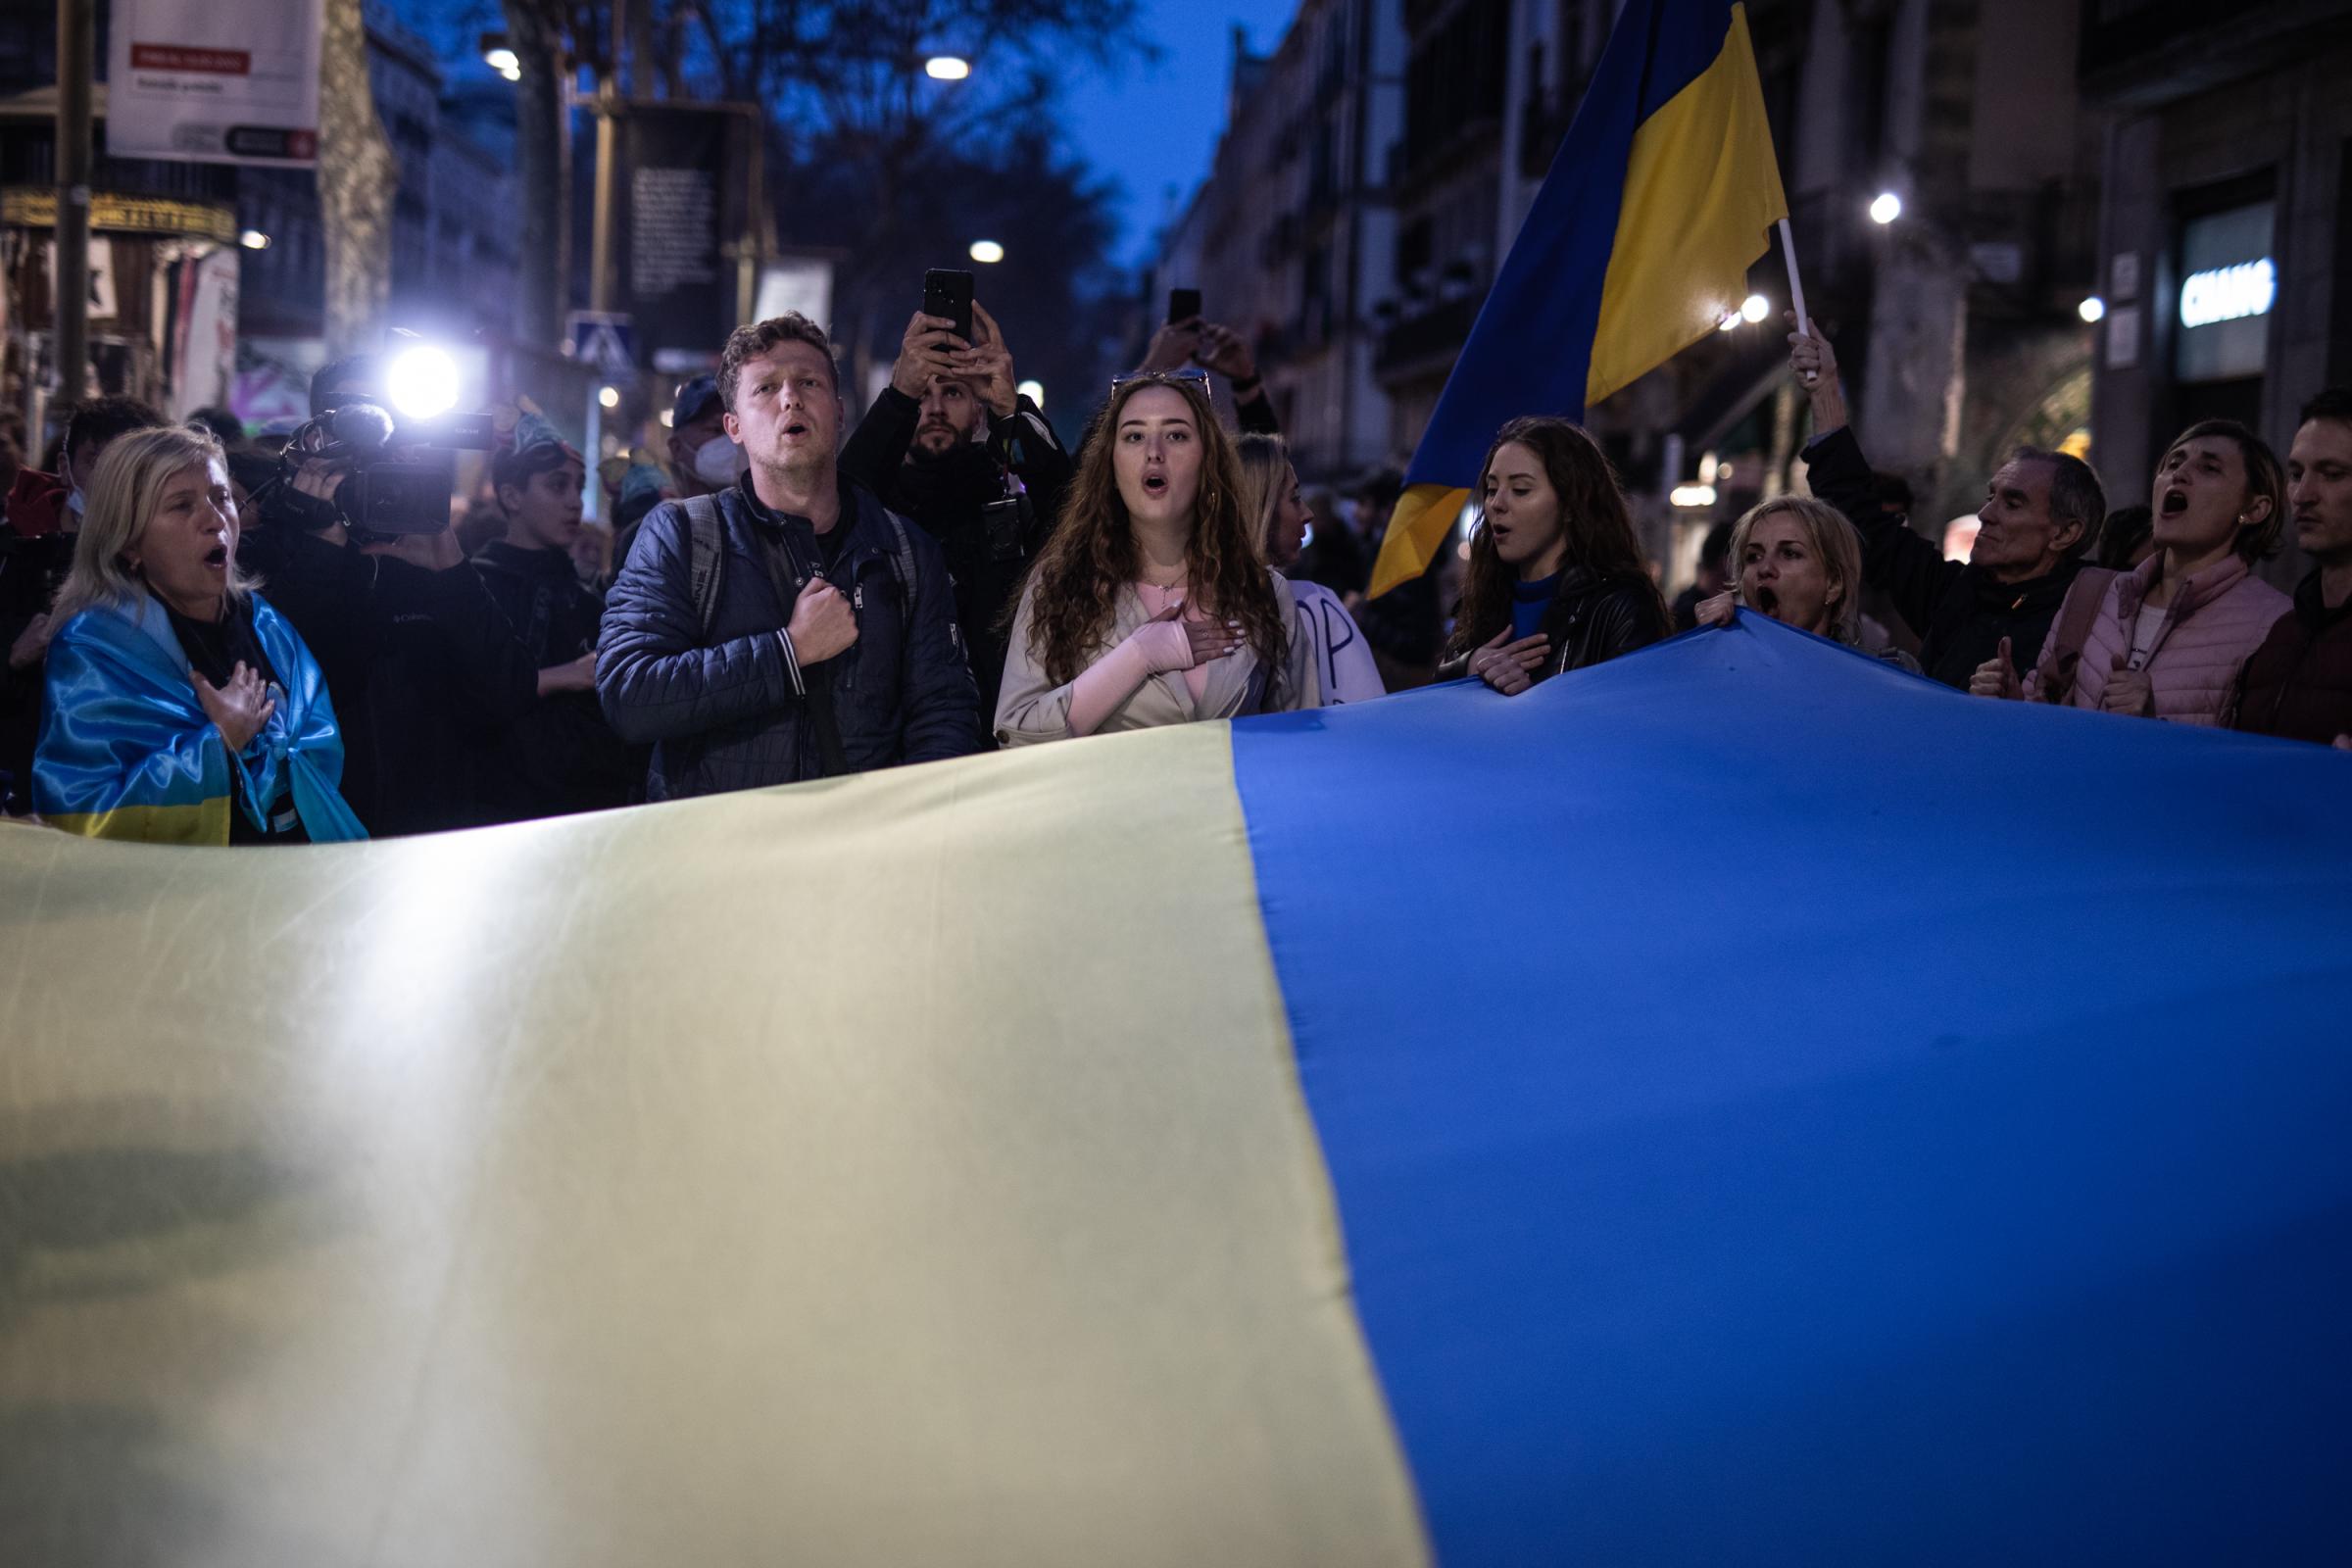 Protestors In Spain Rally For Ukraine After Russian Invasion - BARCELONA, SPAIN - FEBRUARY 24: People protest and sing...